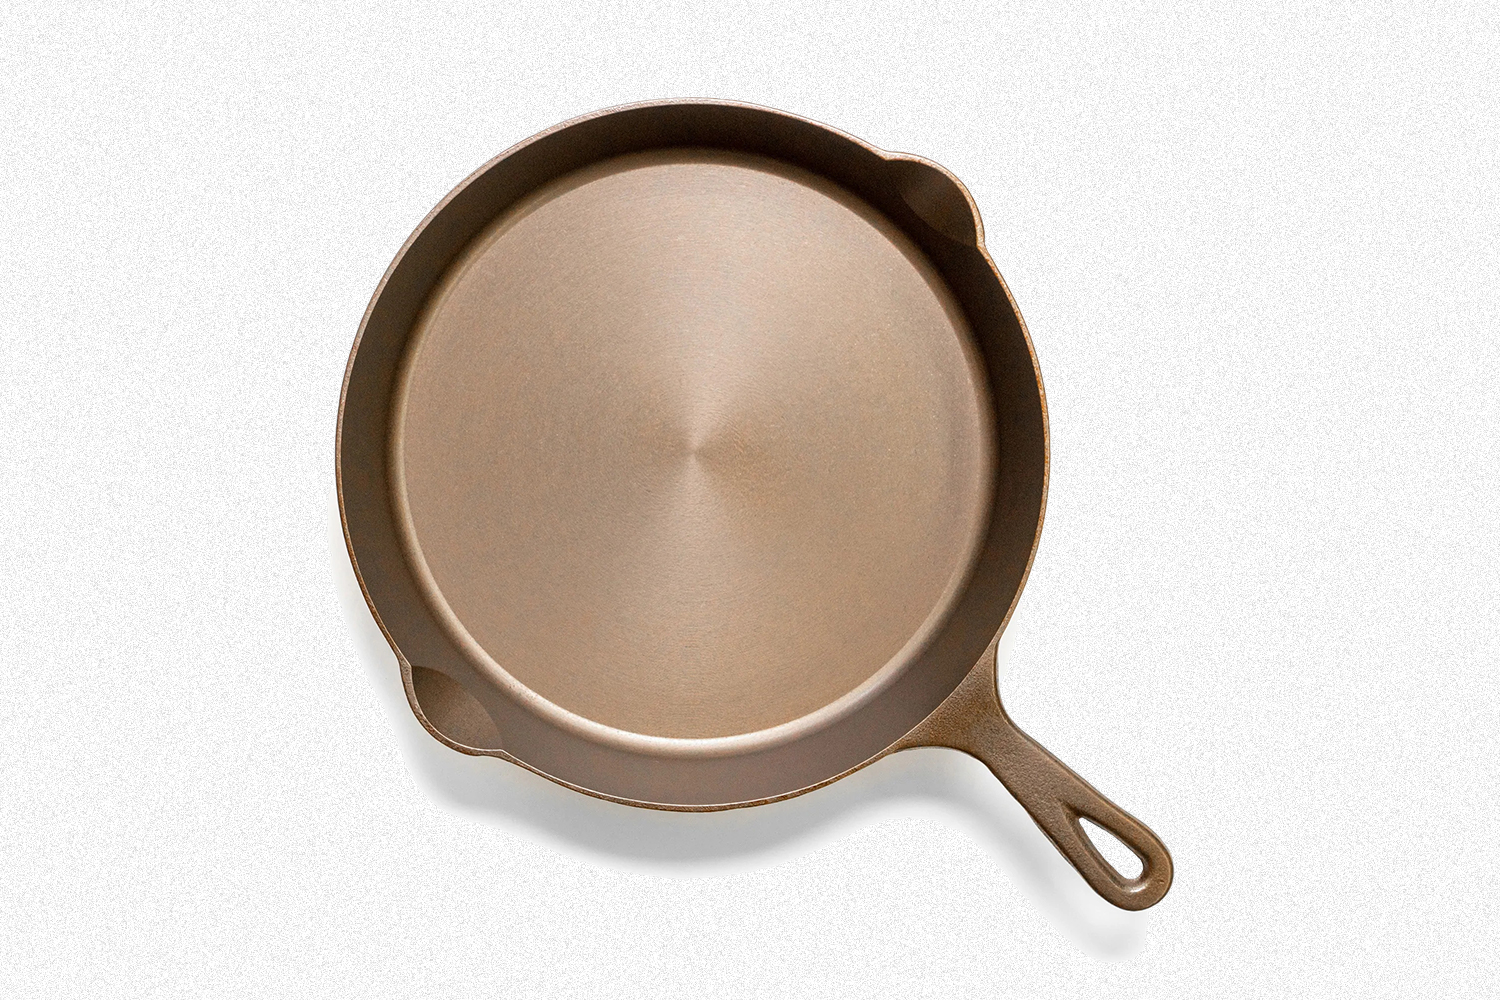 The Best Cast-Iron Skillets